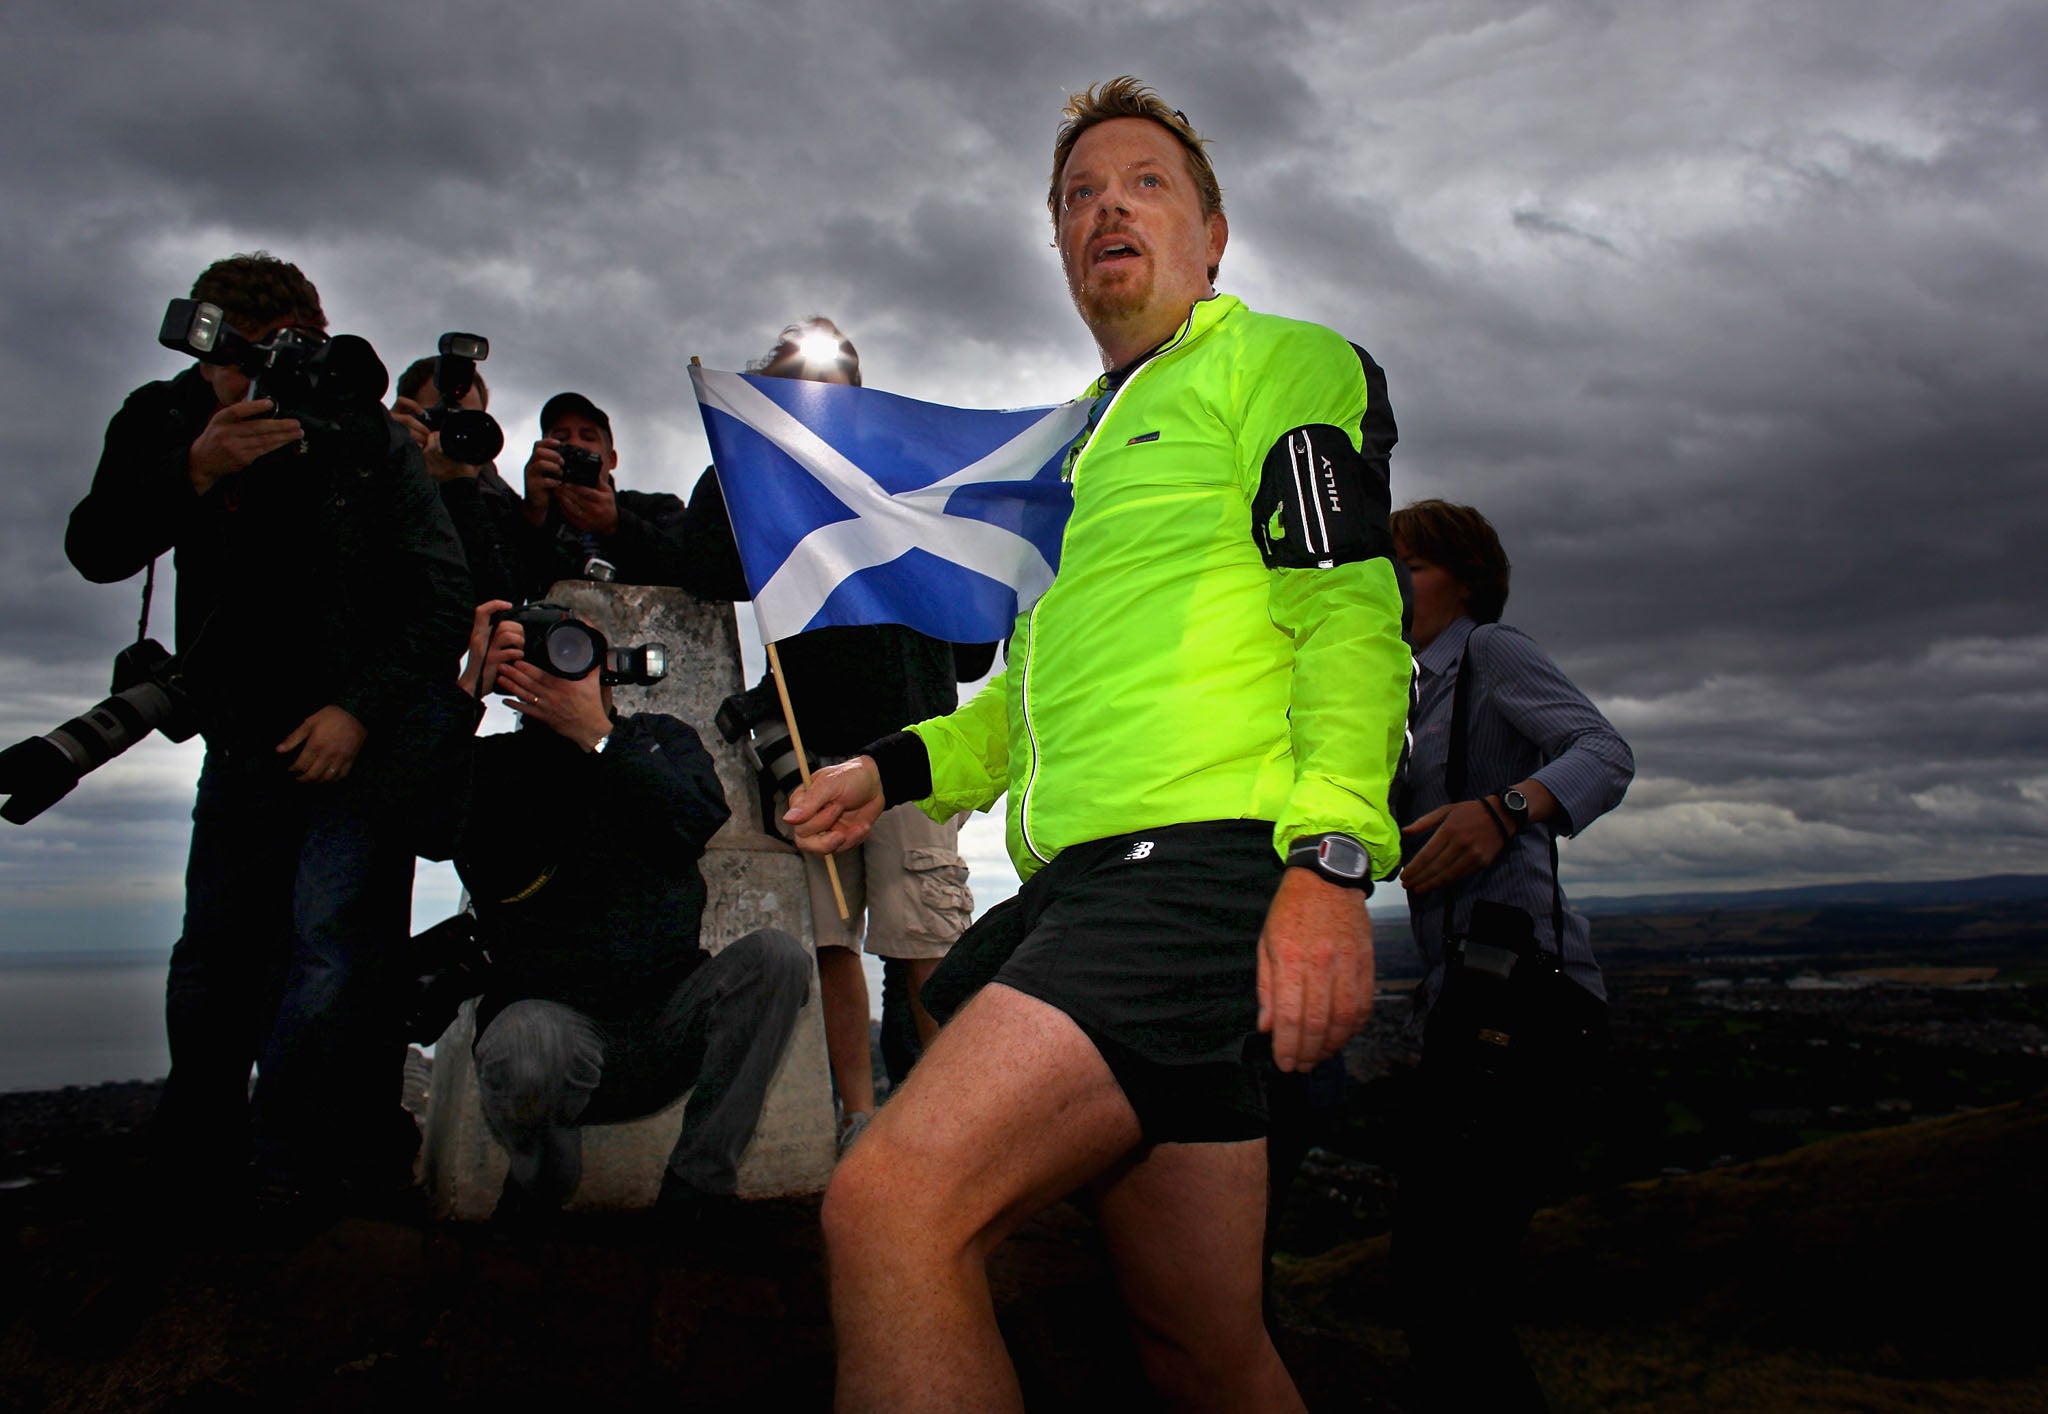 "Please don't go": Eddie Izzard wants Scotland to remain part of the UK